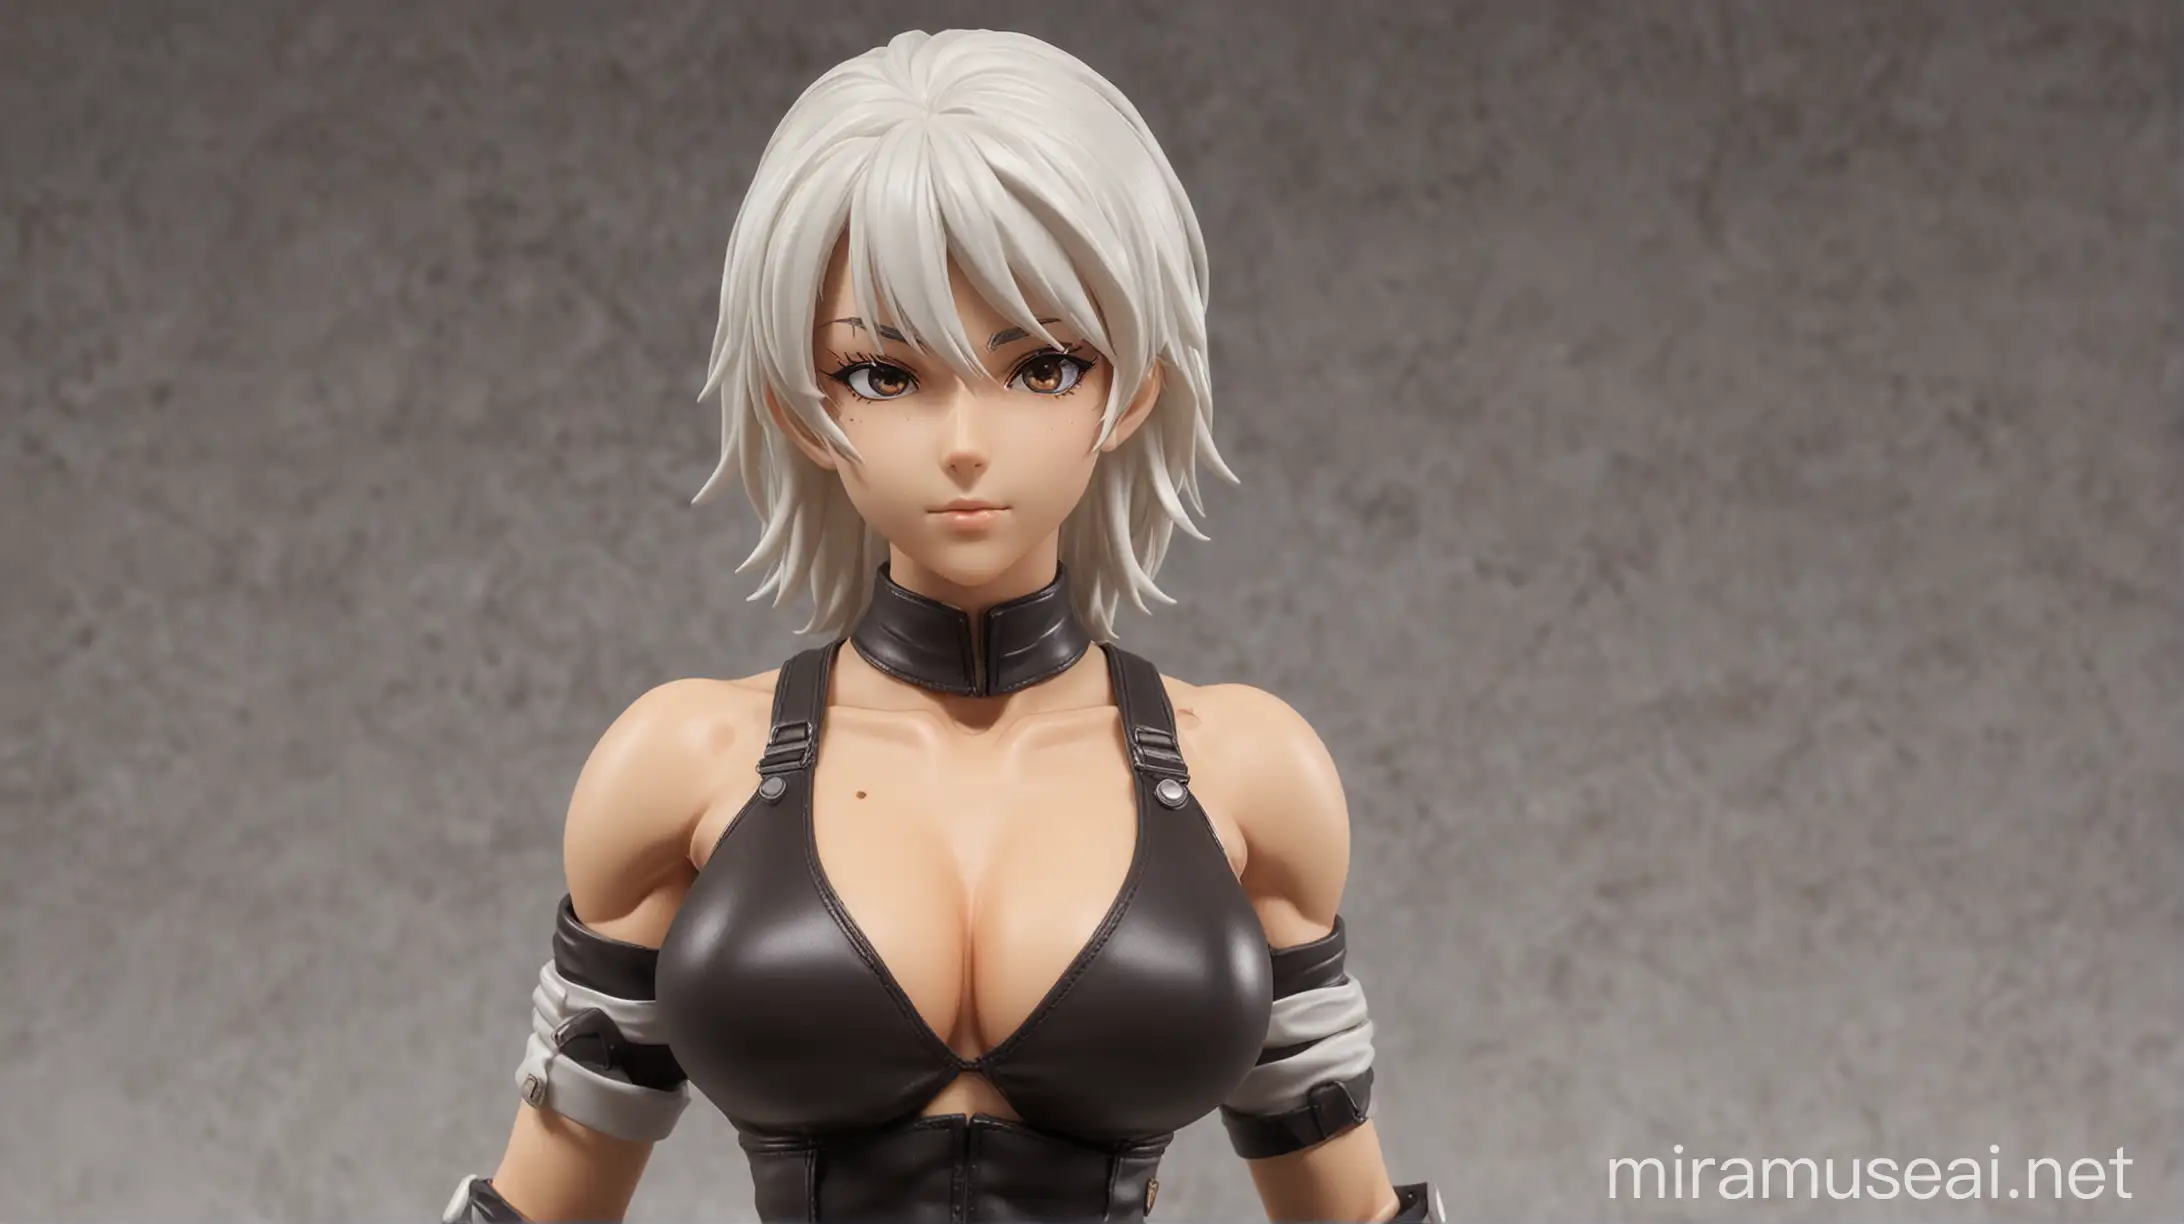 Majestic WhiteHaired Female Anime Muscular Lady